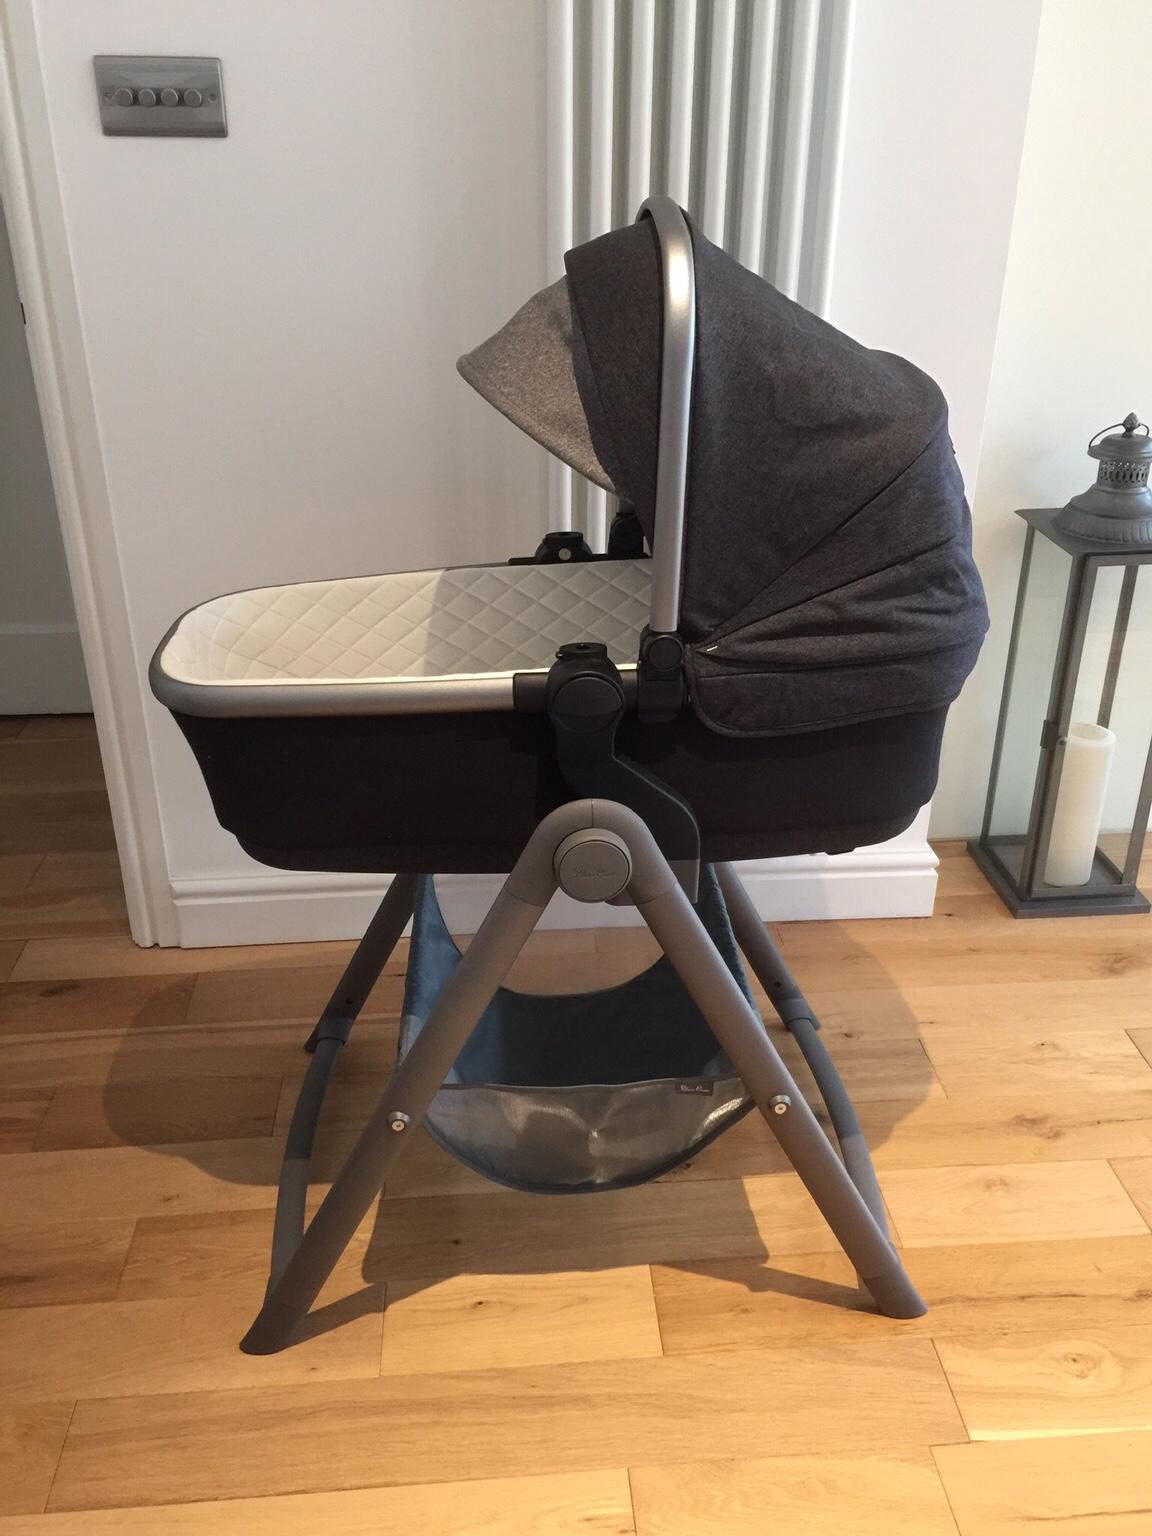 oyster 3 carrycot stand